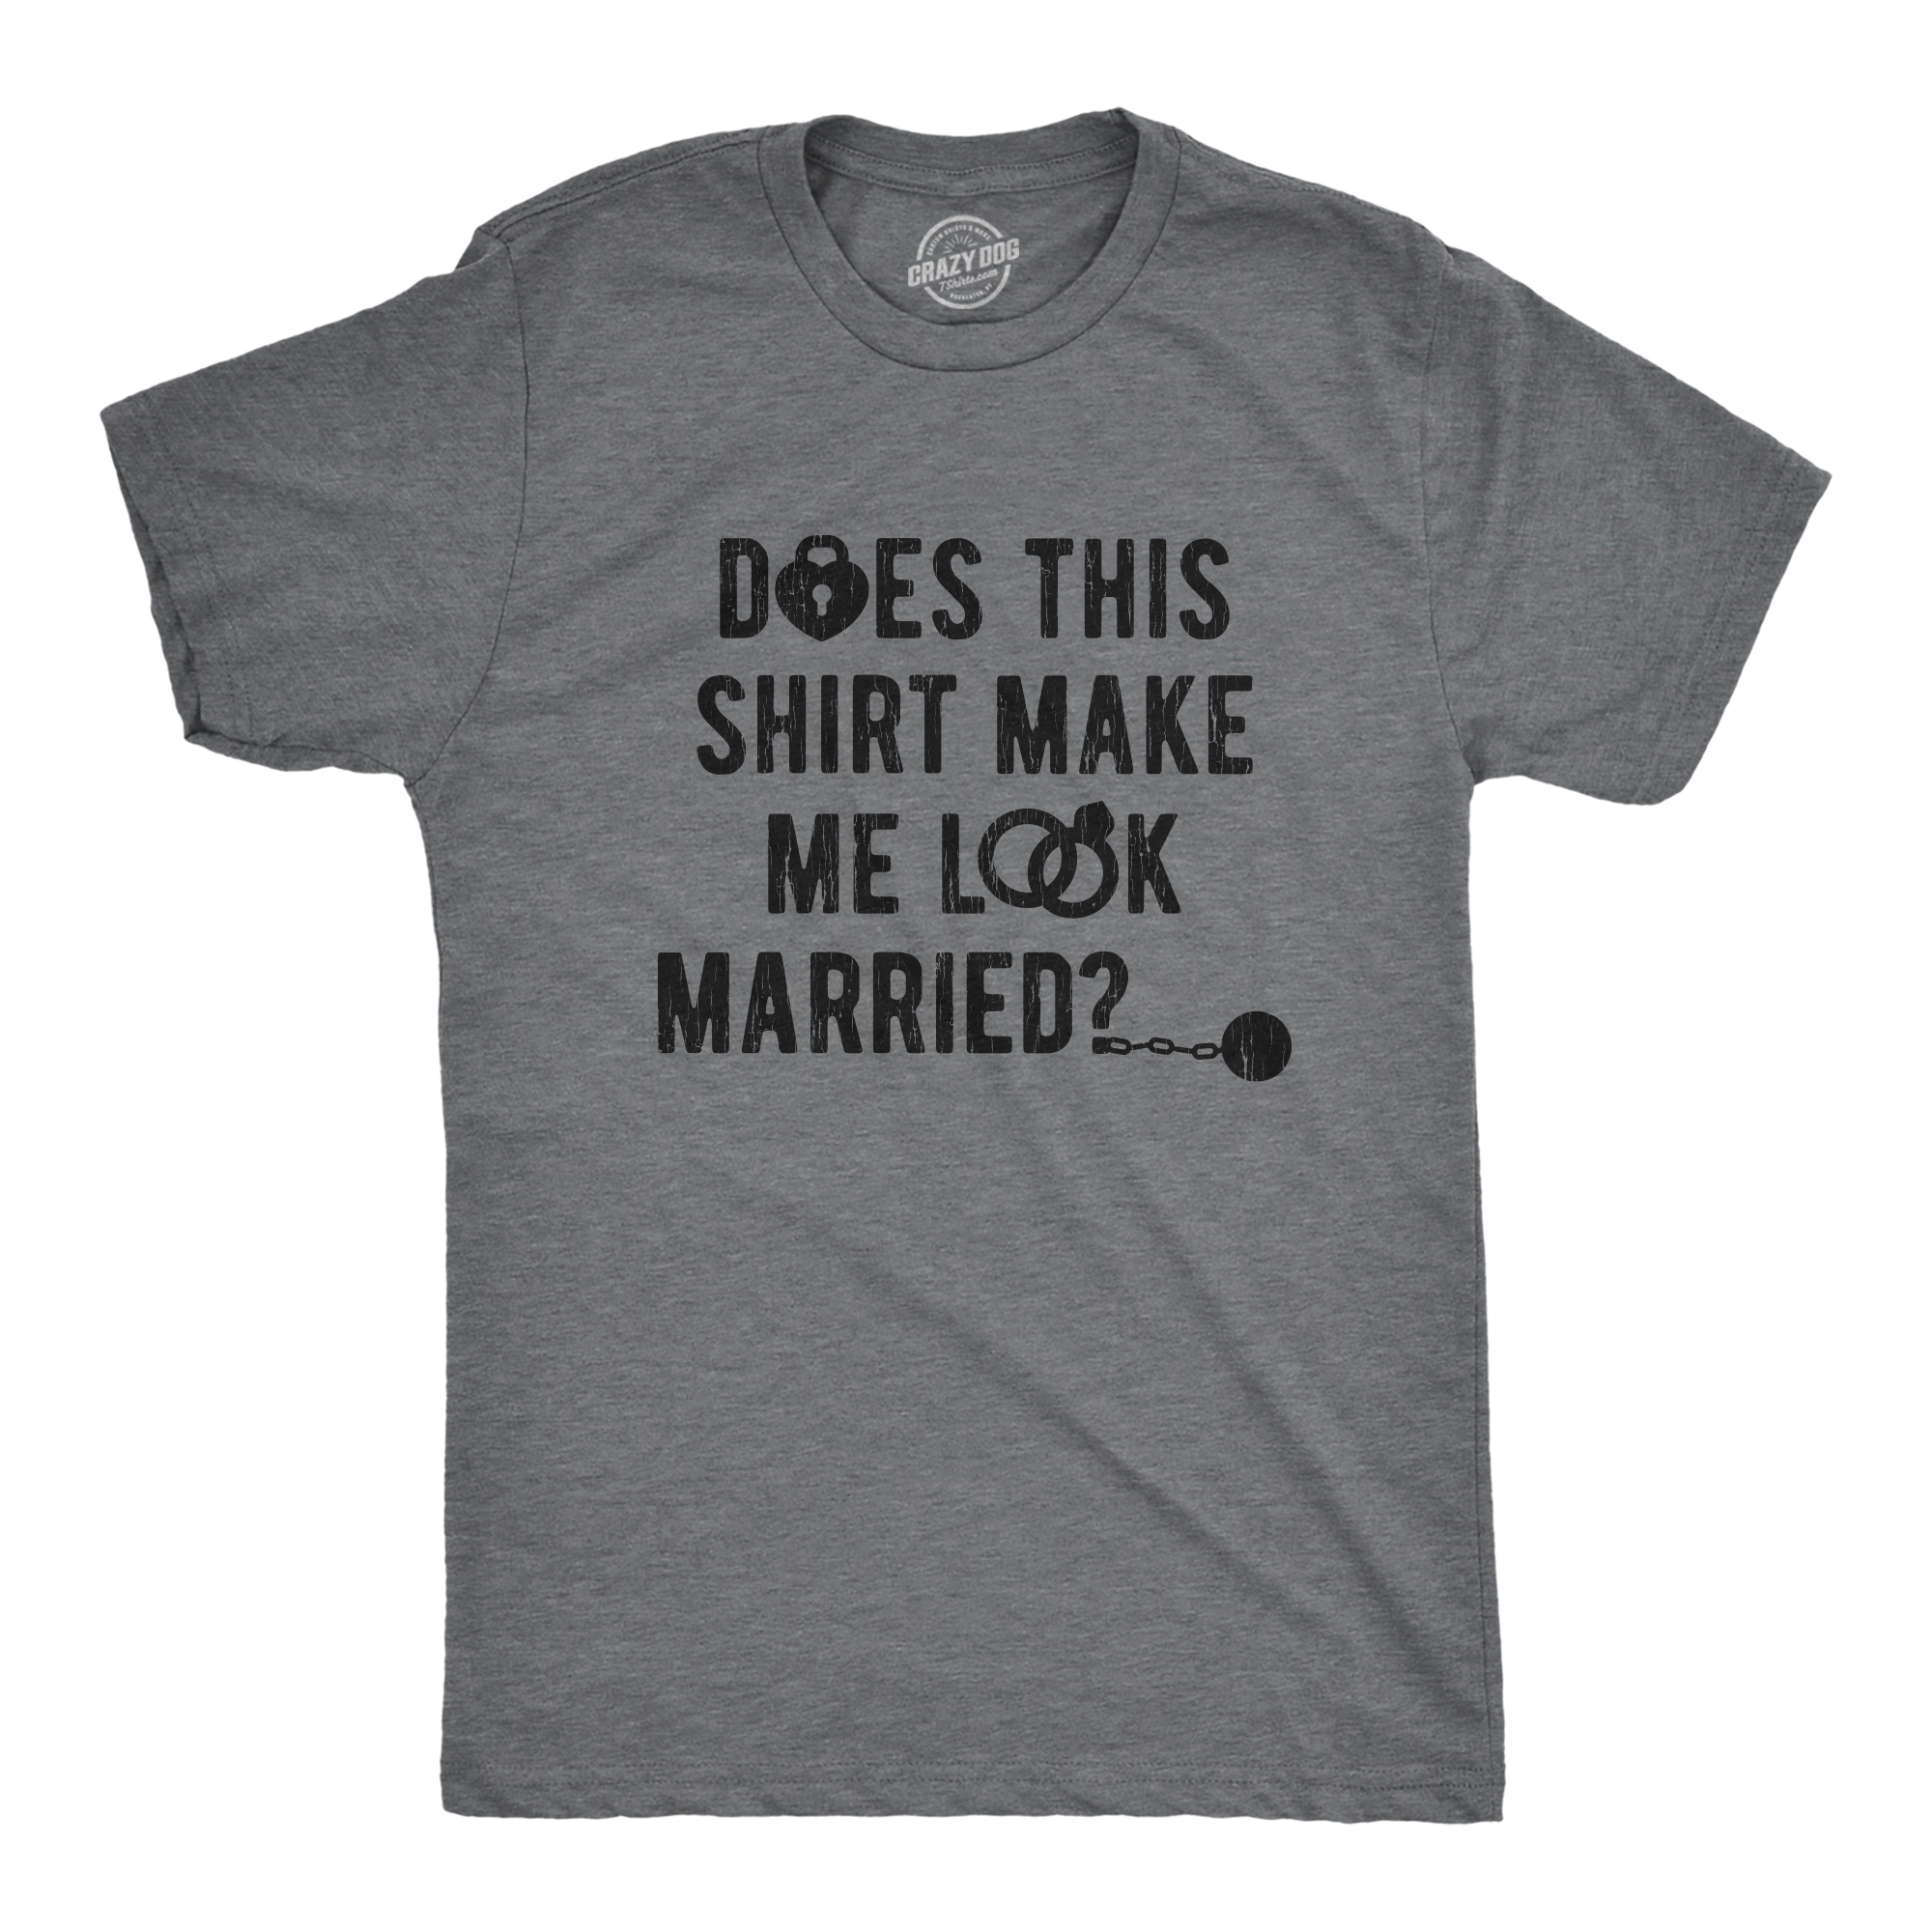 Mens Does This Shirt Make Me Look Married T shirt Bachelor Party Gift for Groom Graphic Tees - image 1 of 9